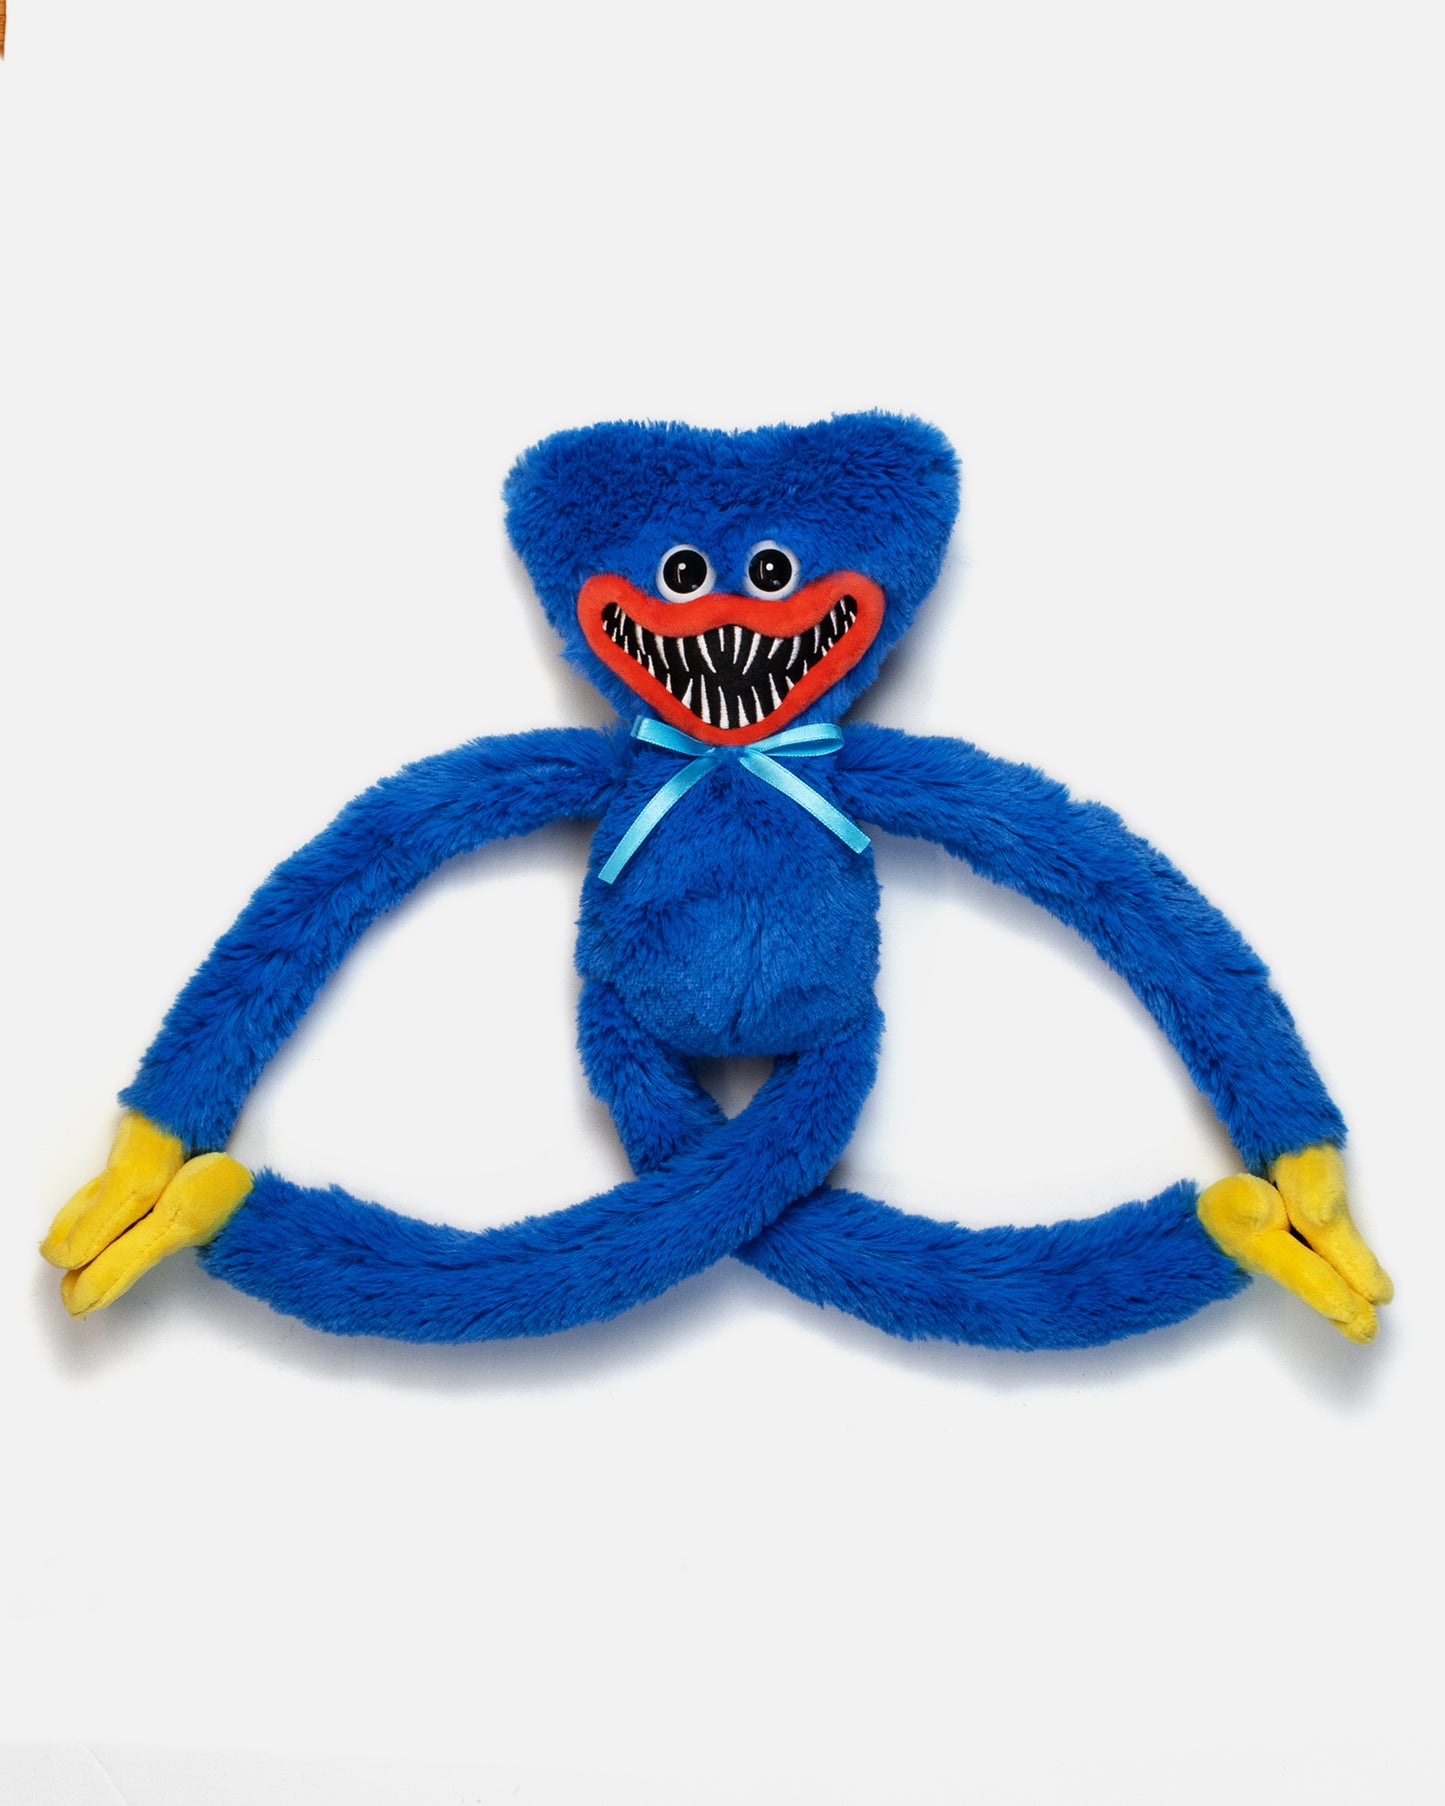 scary huggy wuggy poppy playtime 19" plush front. hands and feet velcro together.